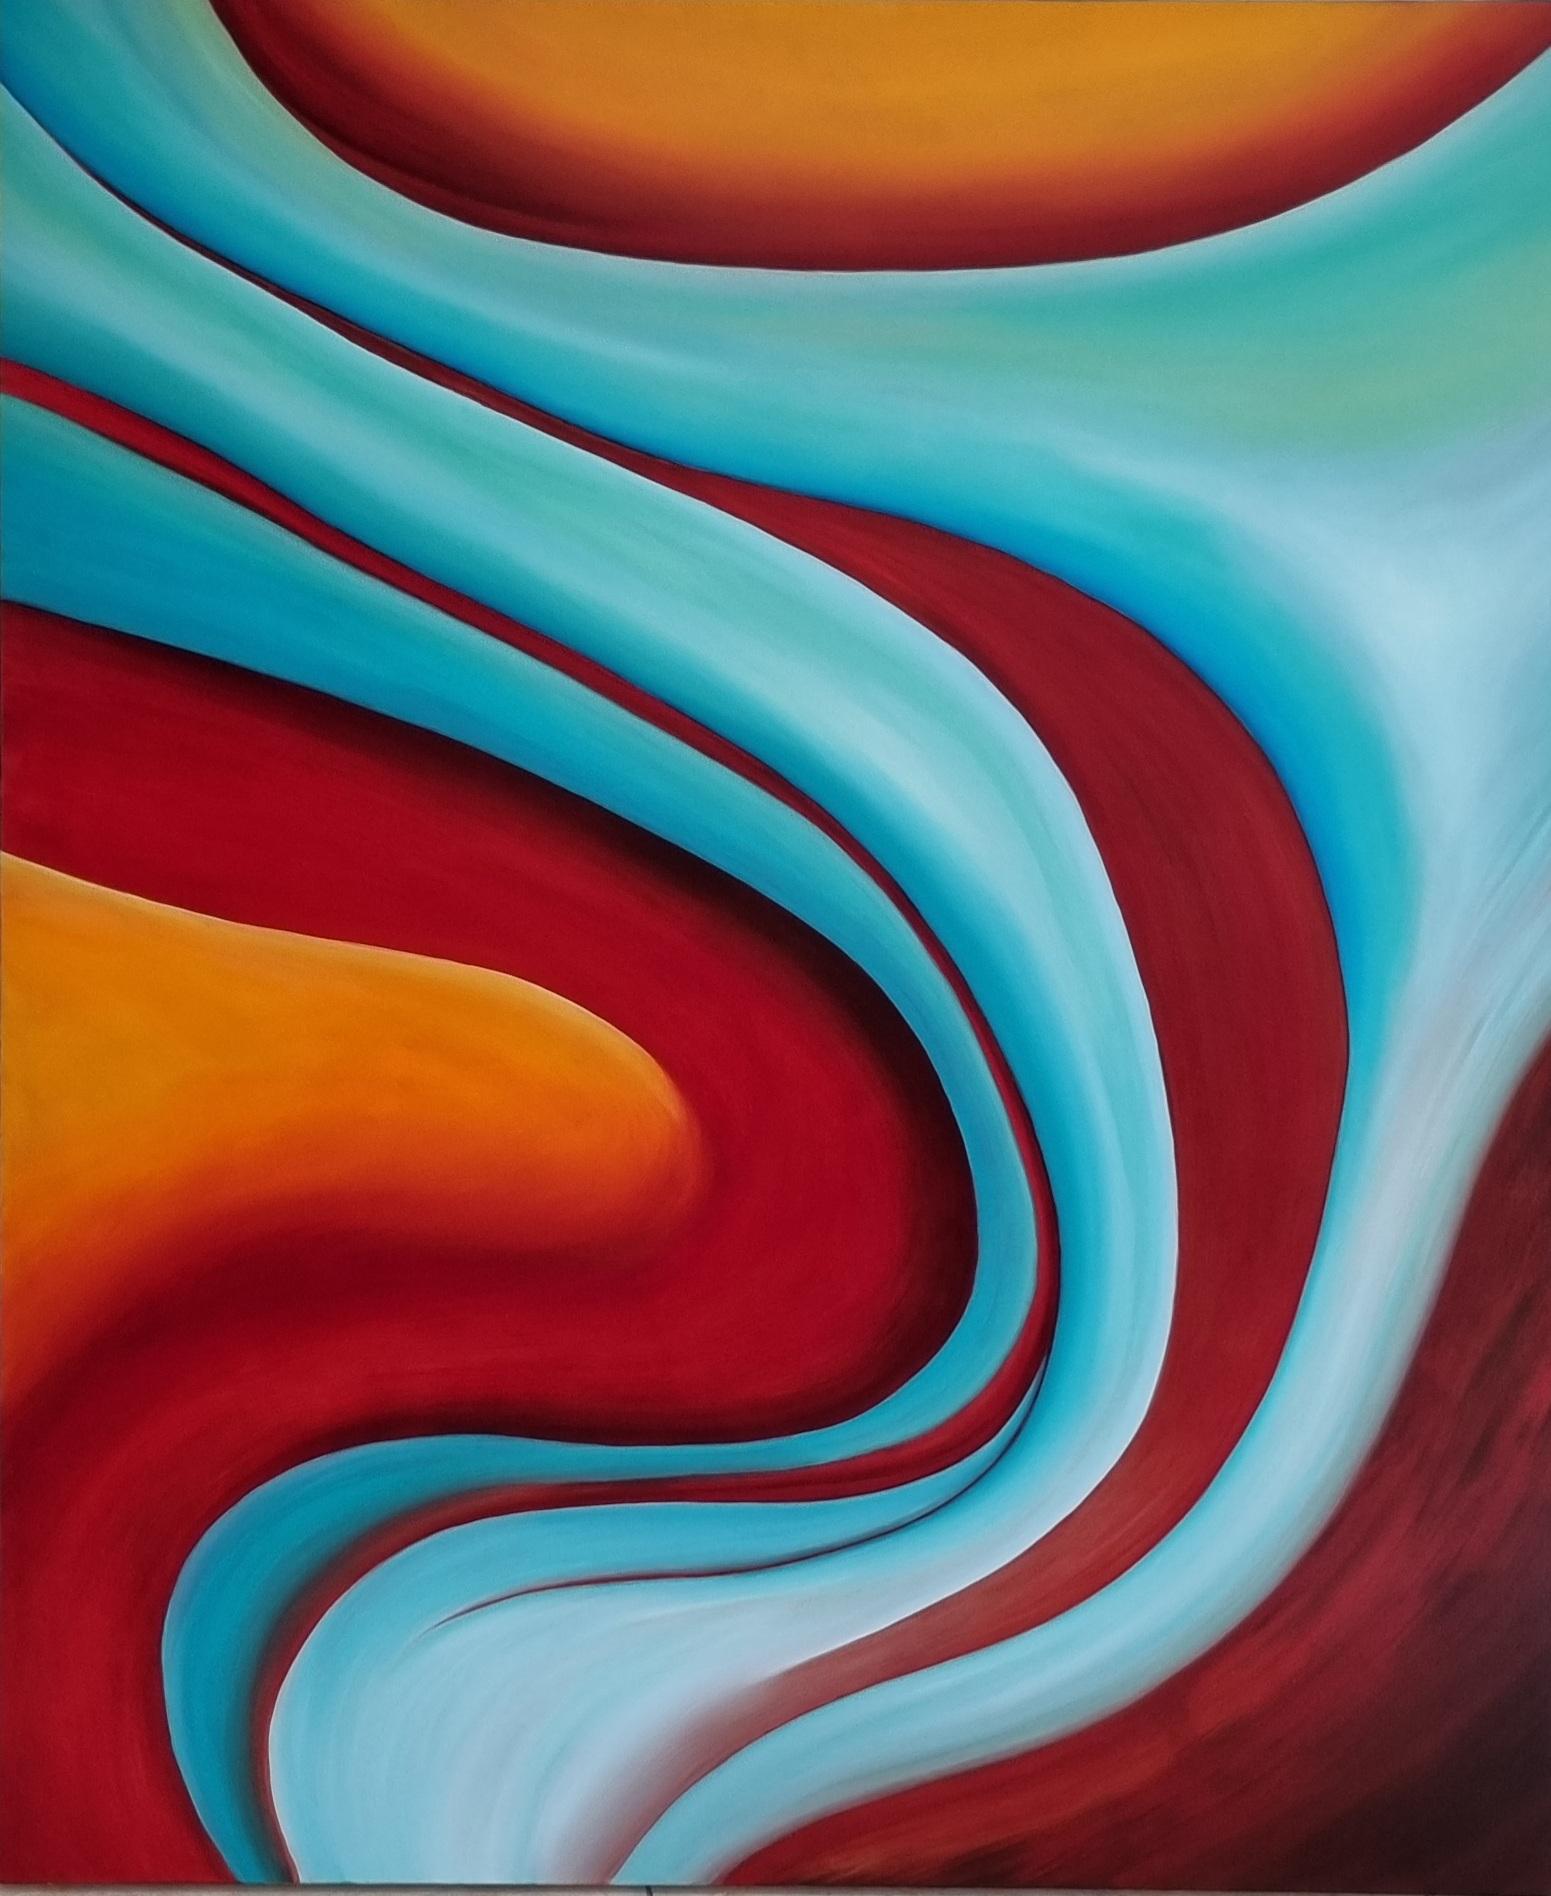 Flow - Painting by Frans de Bruyn